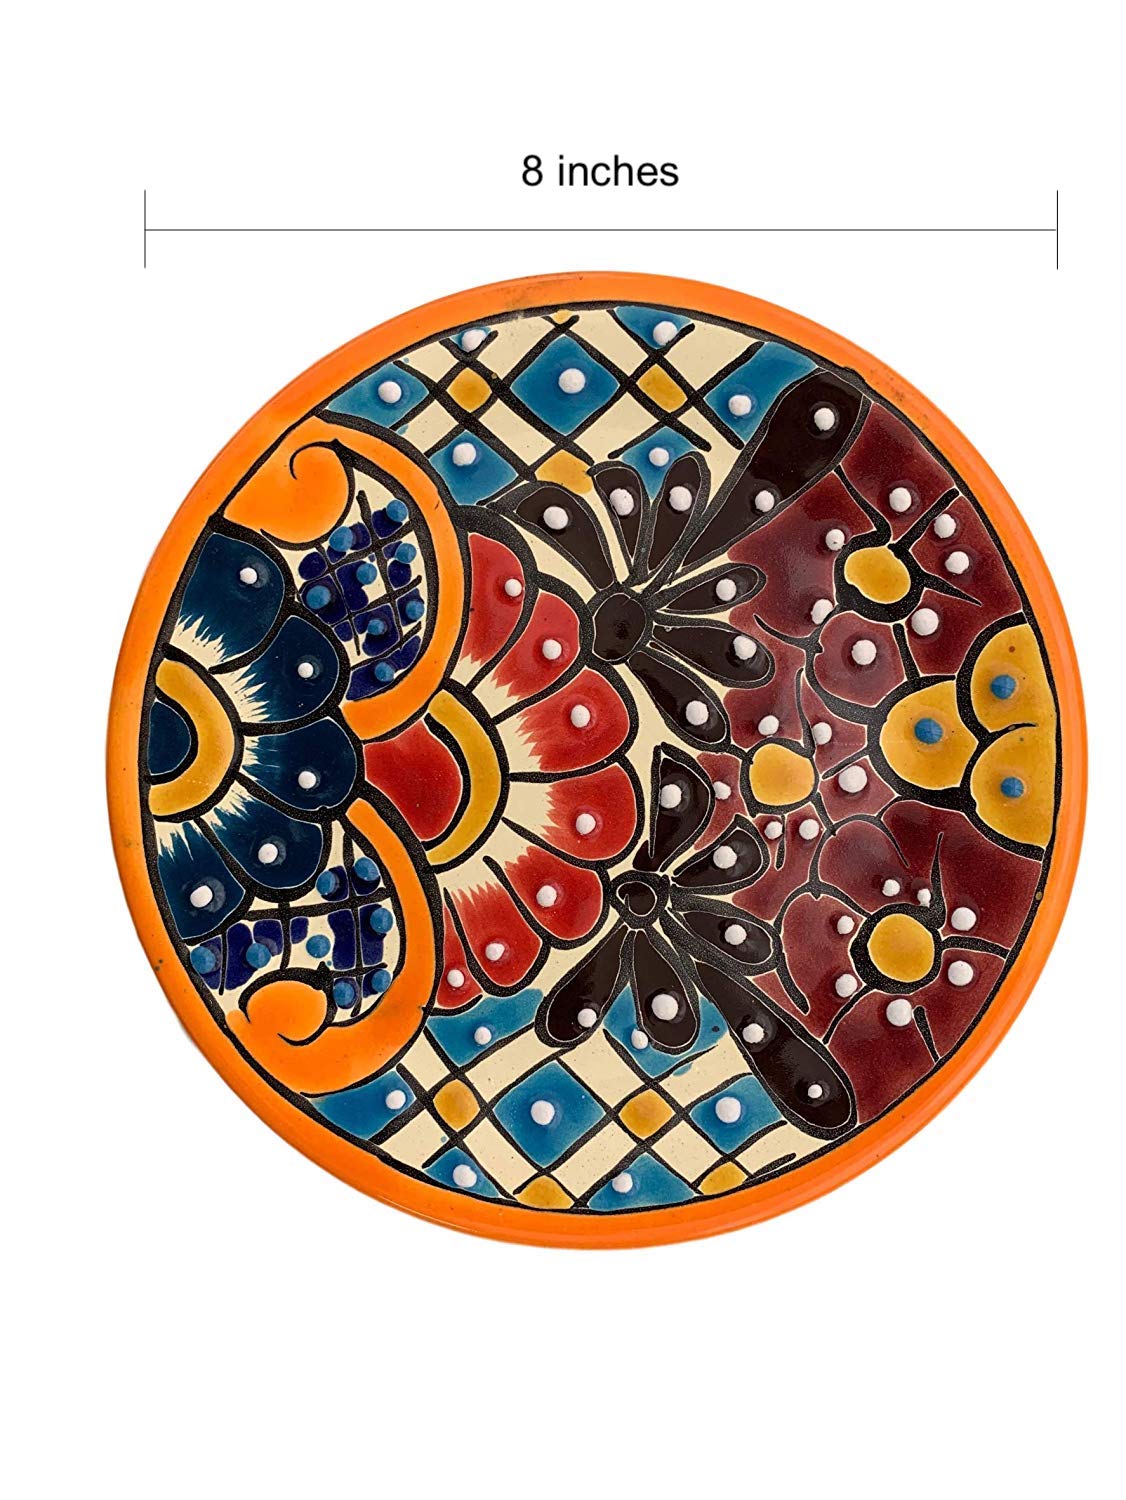 Exquisite Mexican handmade Talavera plate featuring vibrant handpainted Mexican folk art designs, made in Mexico for an authentic and unique dish experience.